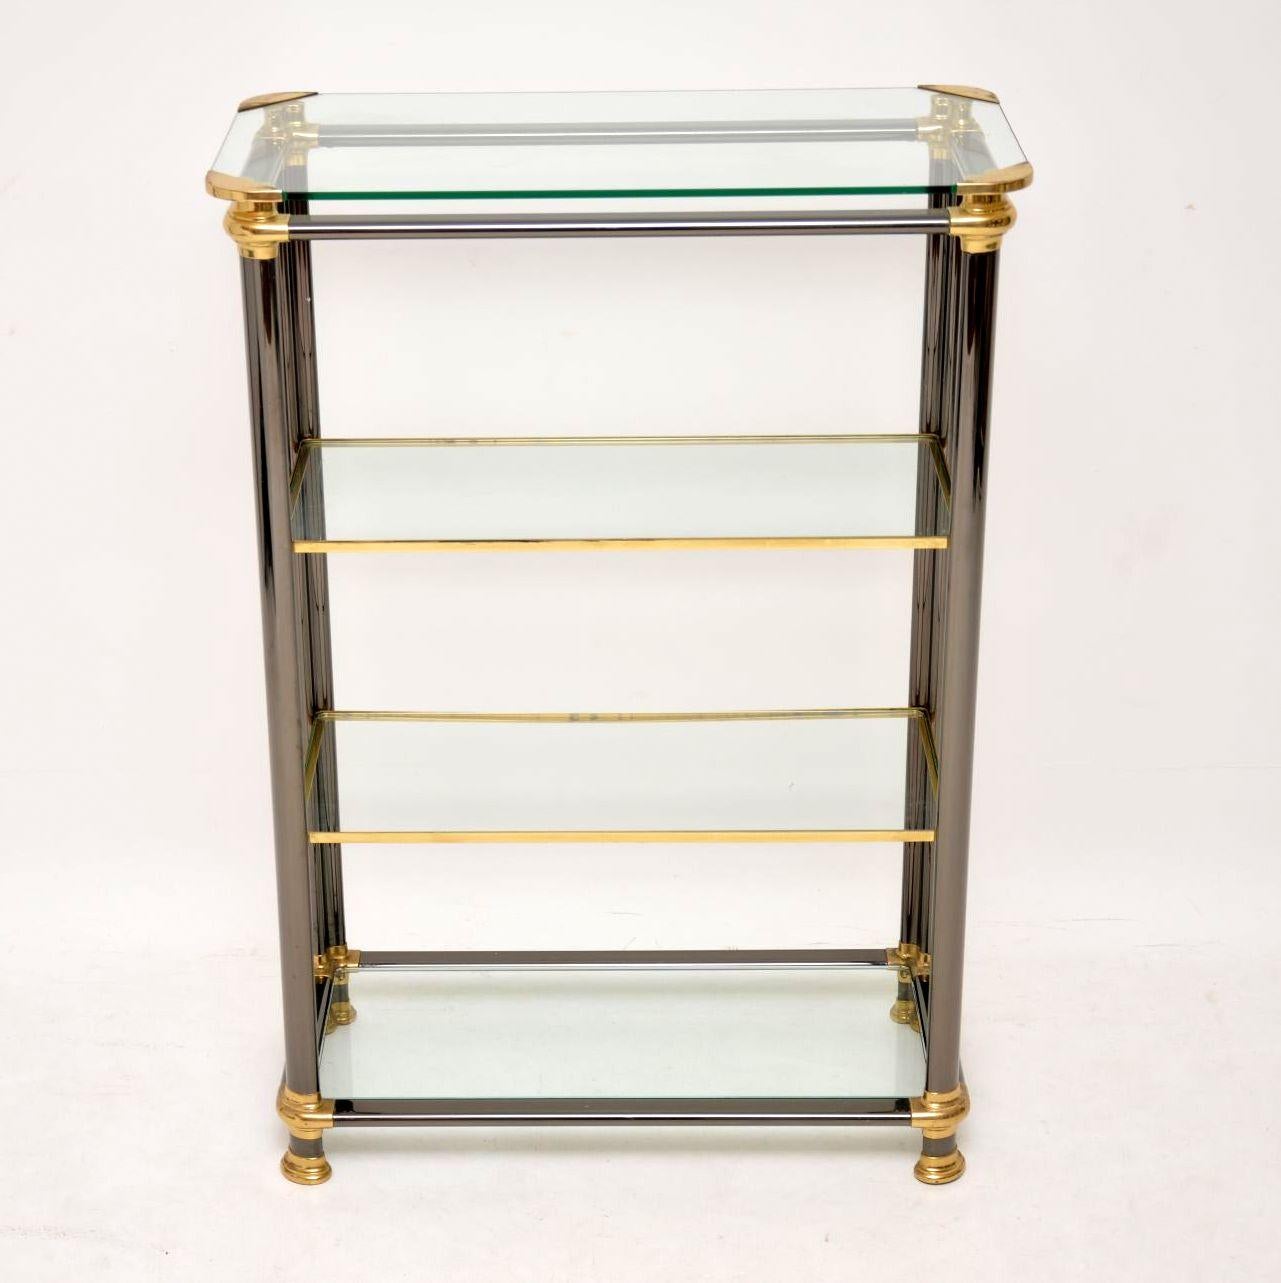 A beautiful and extremely well made cabinet in painted steel, brass and glass, this dates from the 1970s, it was most likely made in Italy. It’s of super quality, the frame is very heavy and solid, the clear glass shelves are all thick and